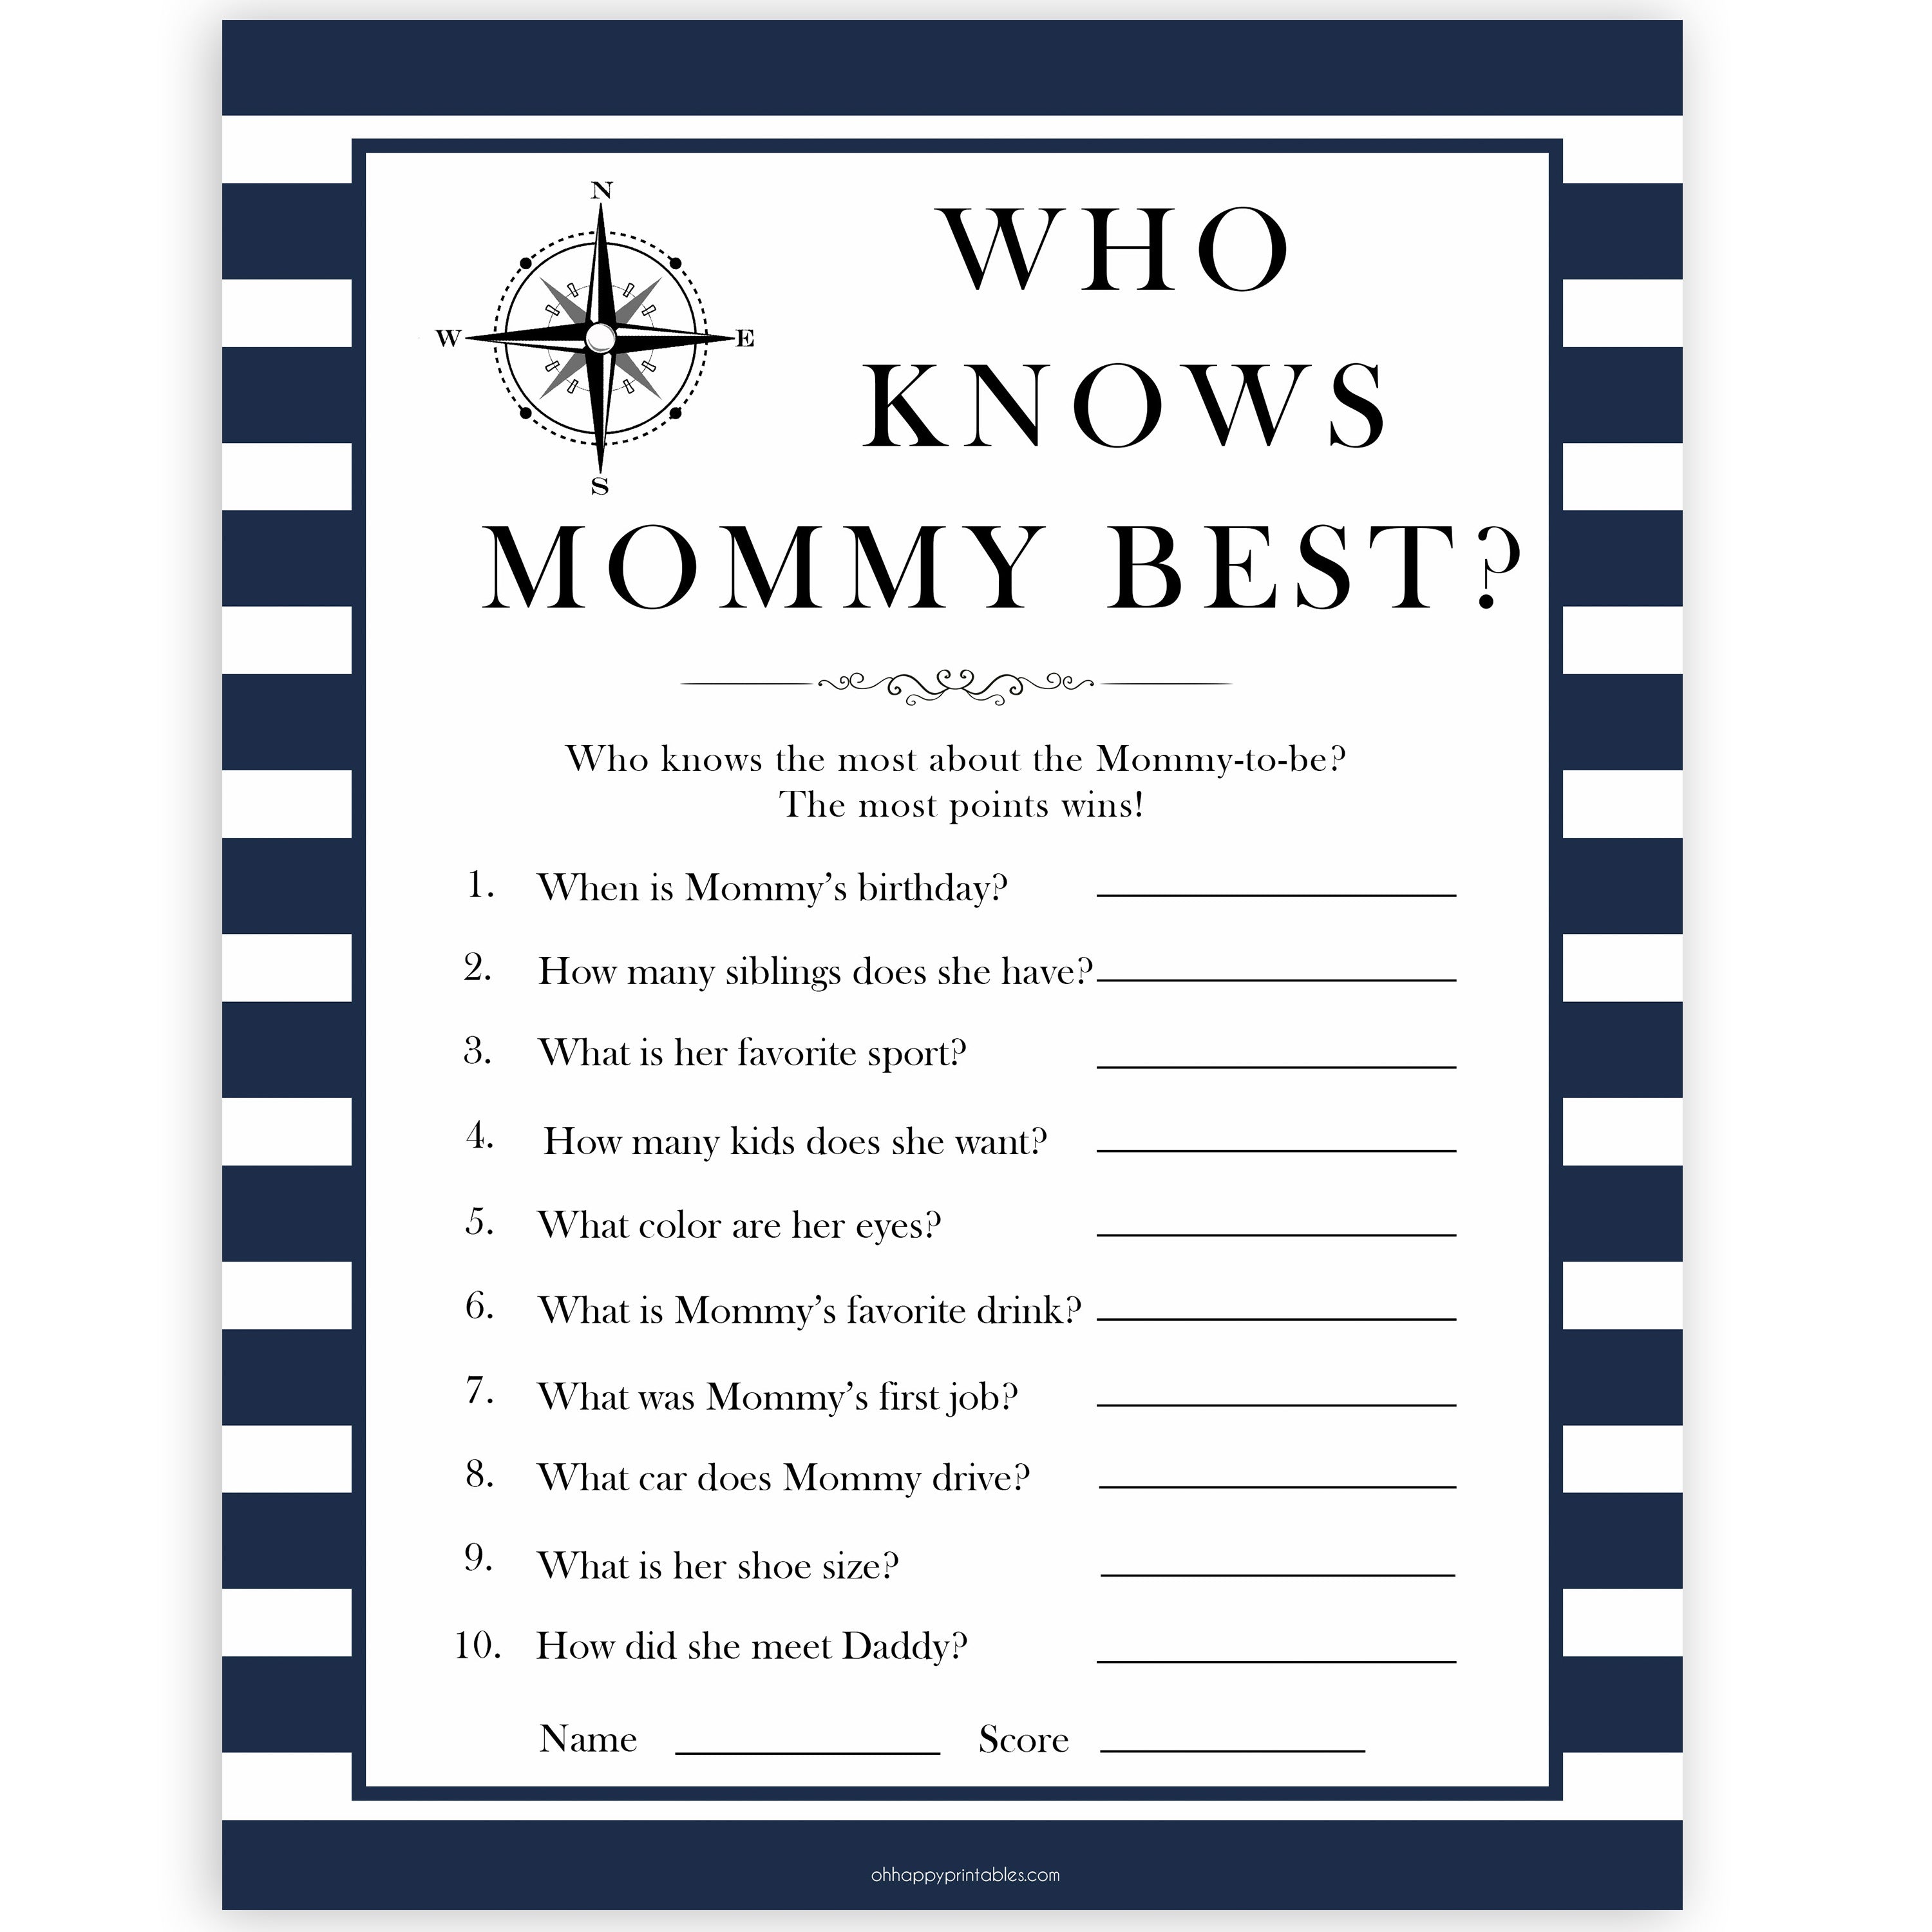 Nautical baby shower games, who knows mummy best baby shower games, printable baby shower games, baby shower games, fun baby games, ahoy its a boy, popular baby shower games, sailor baby games, boat baby games